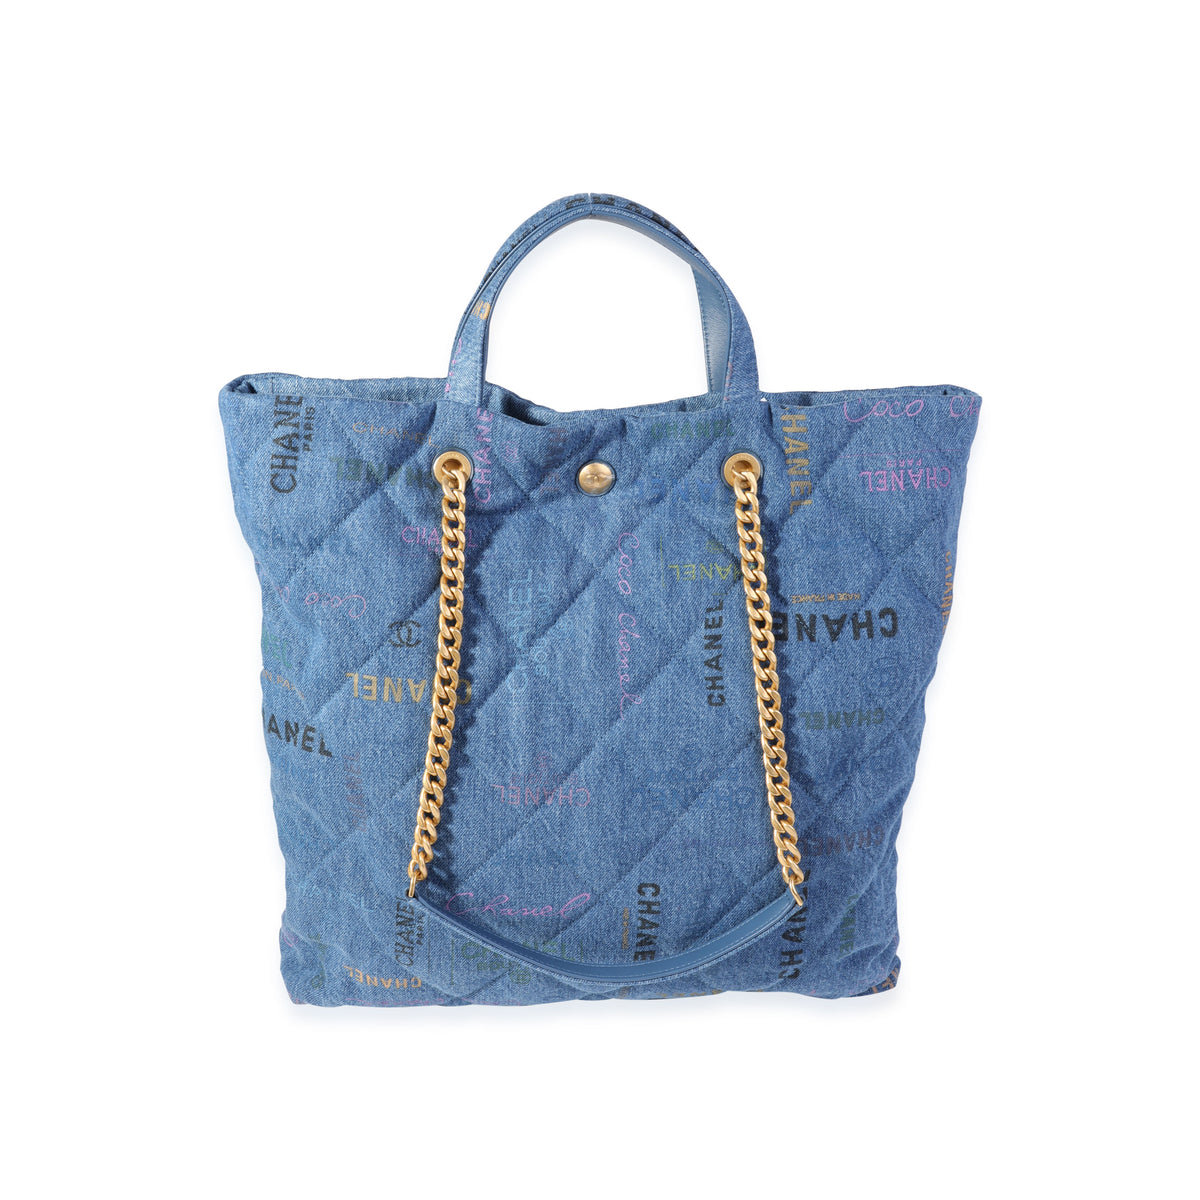 Chanel Blue & Multicolor Quilted Denim Mood Shopping Tote, myGemma